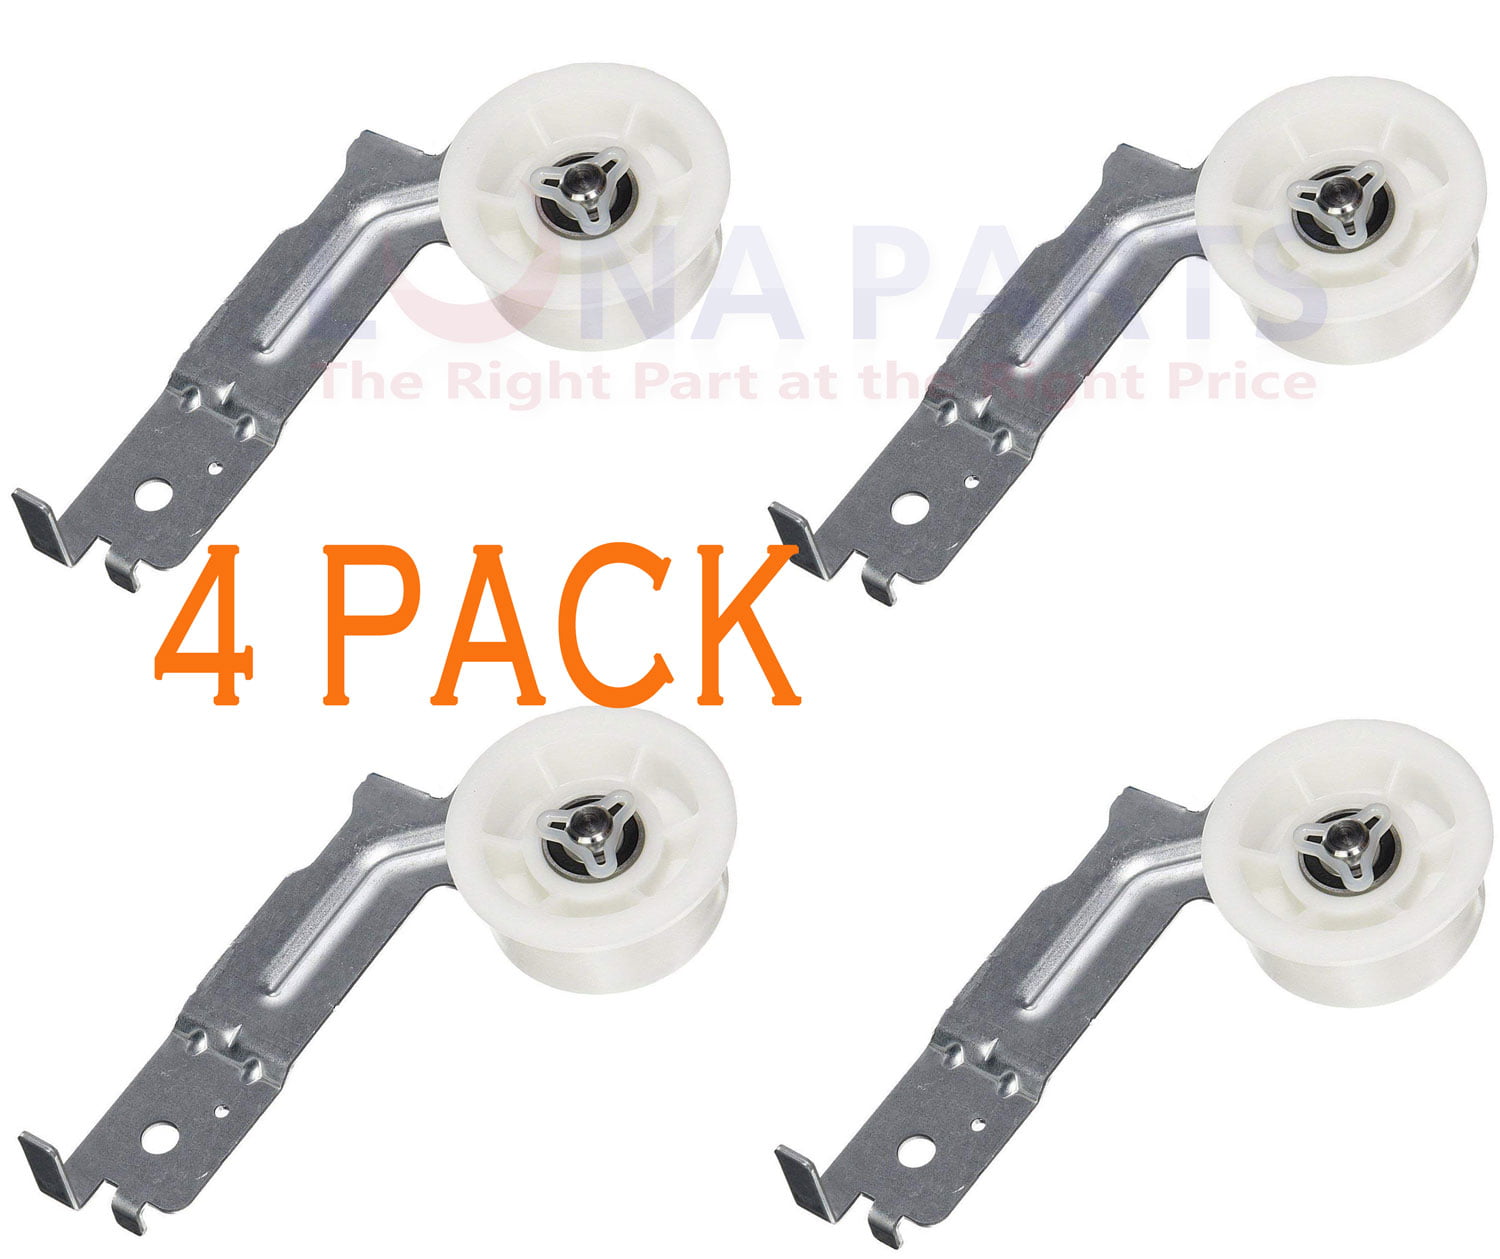 DC96-00882C for Samsung Assembly Bracket Idler Pulley AP4213616 PS42168 4 PACK